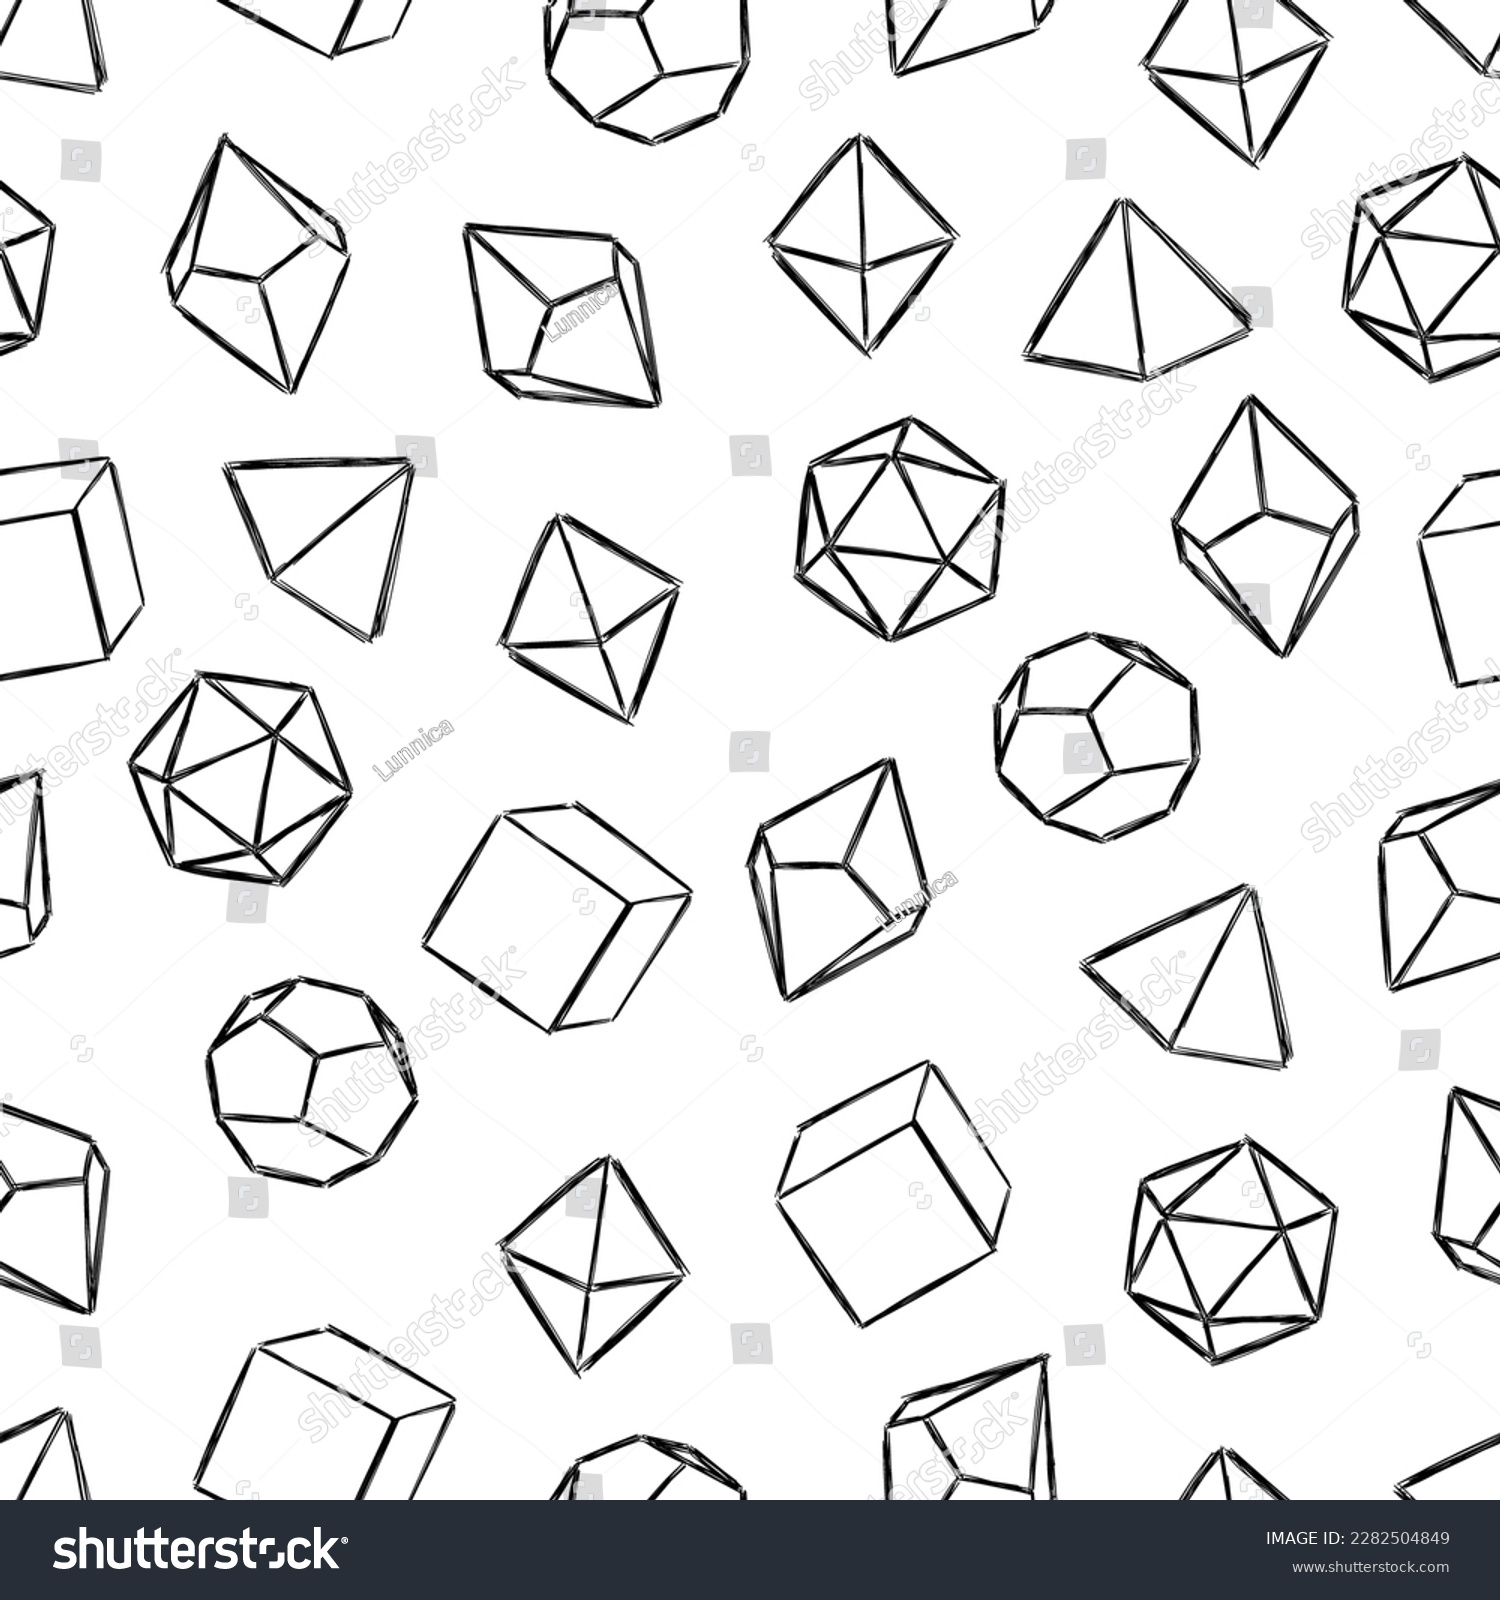 SVG of Seamless pattern of dice for board games. svg